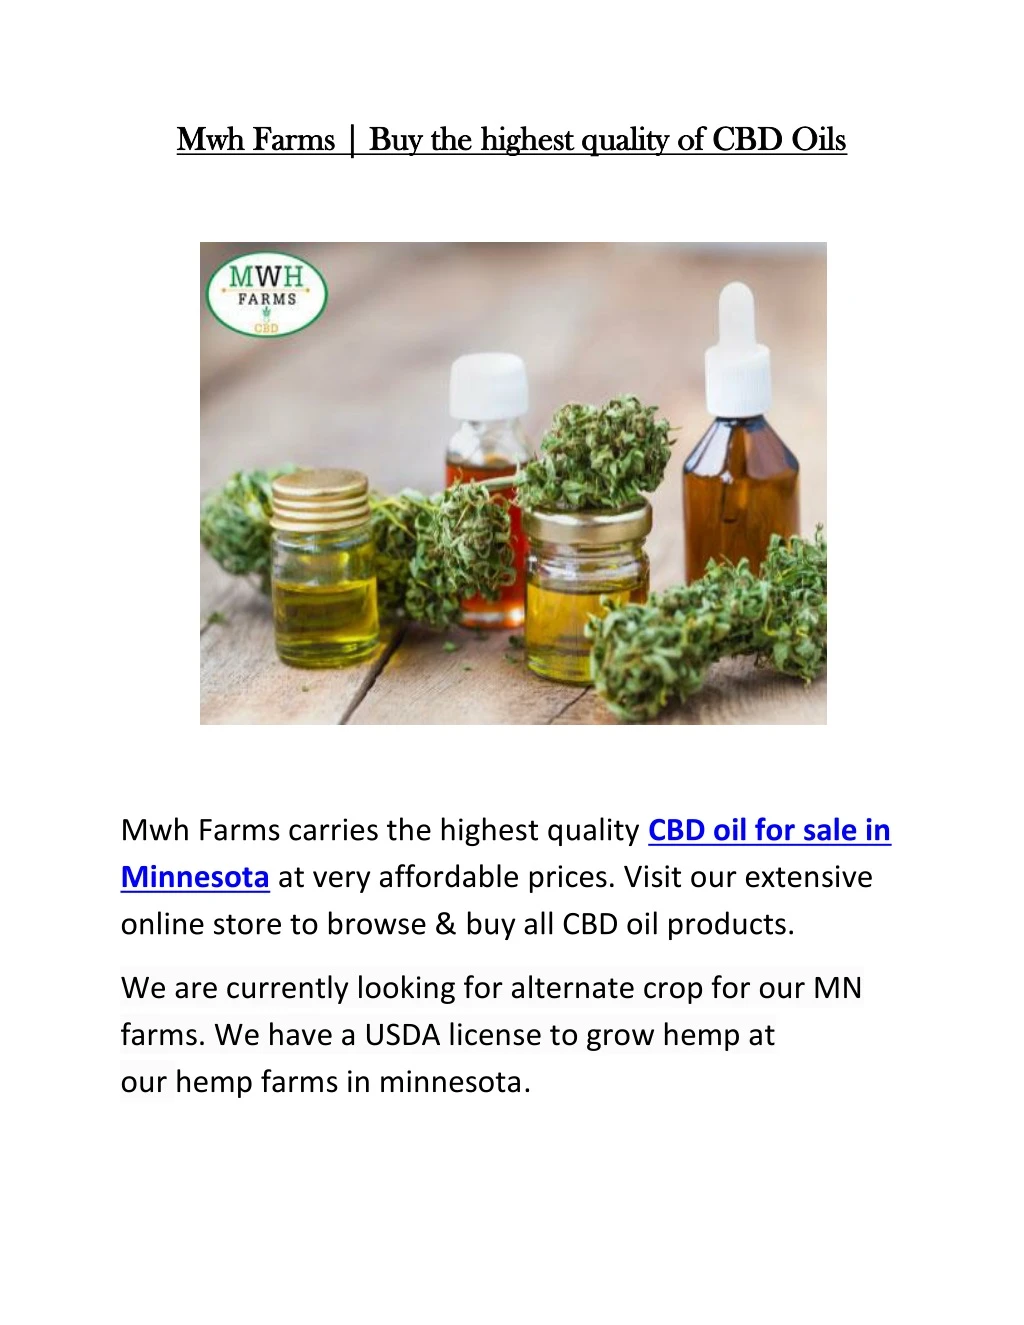 mwh farms buy the highest quality of cbd oils